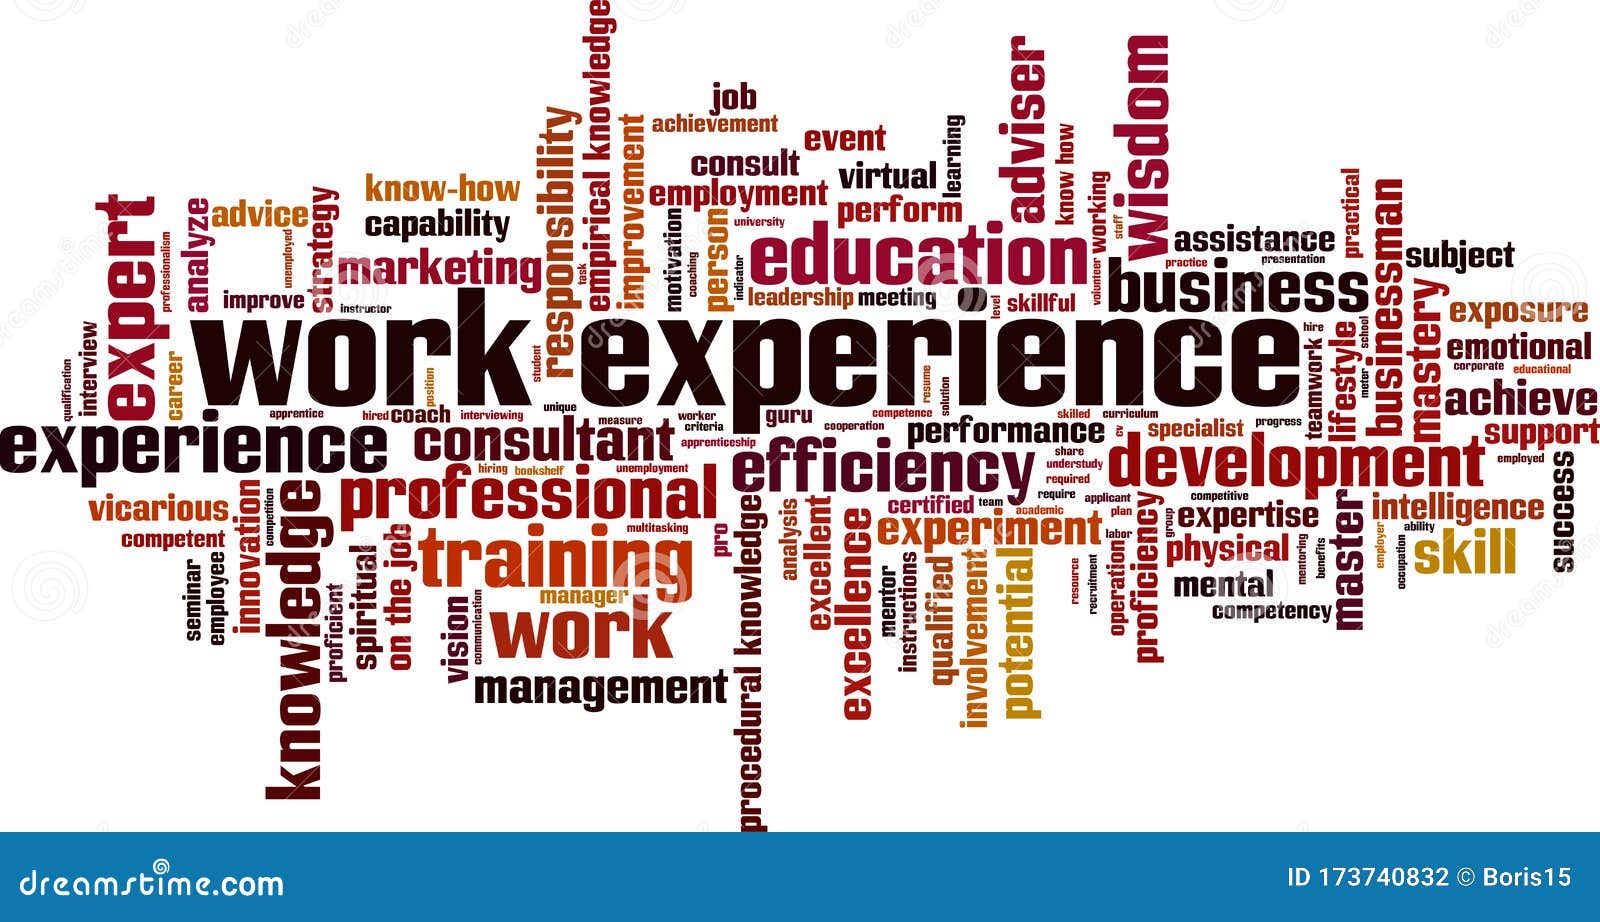 Working experience or work experience. Work experience. Work experience картинки. Experienced картинка. Previous work experience.